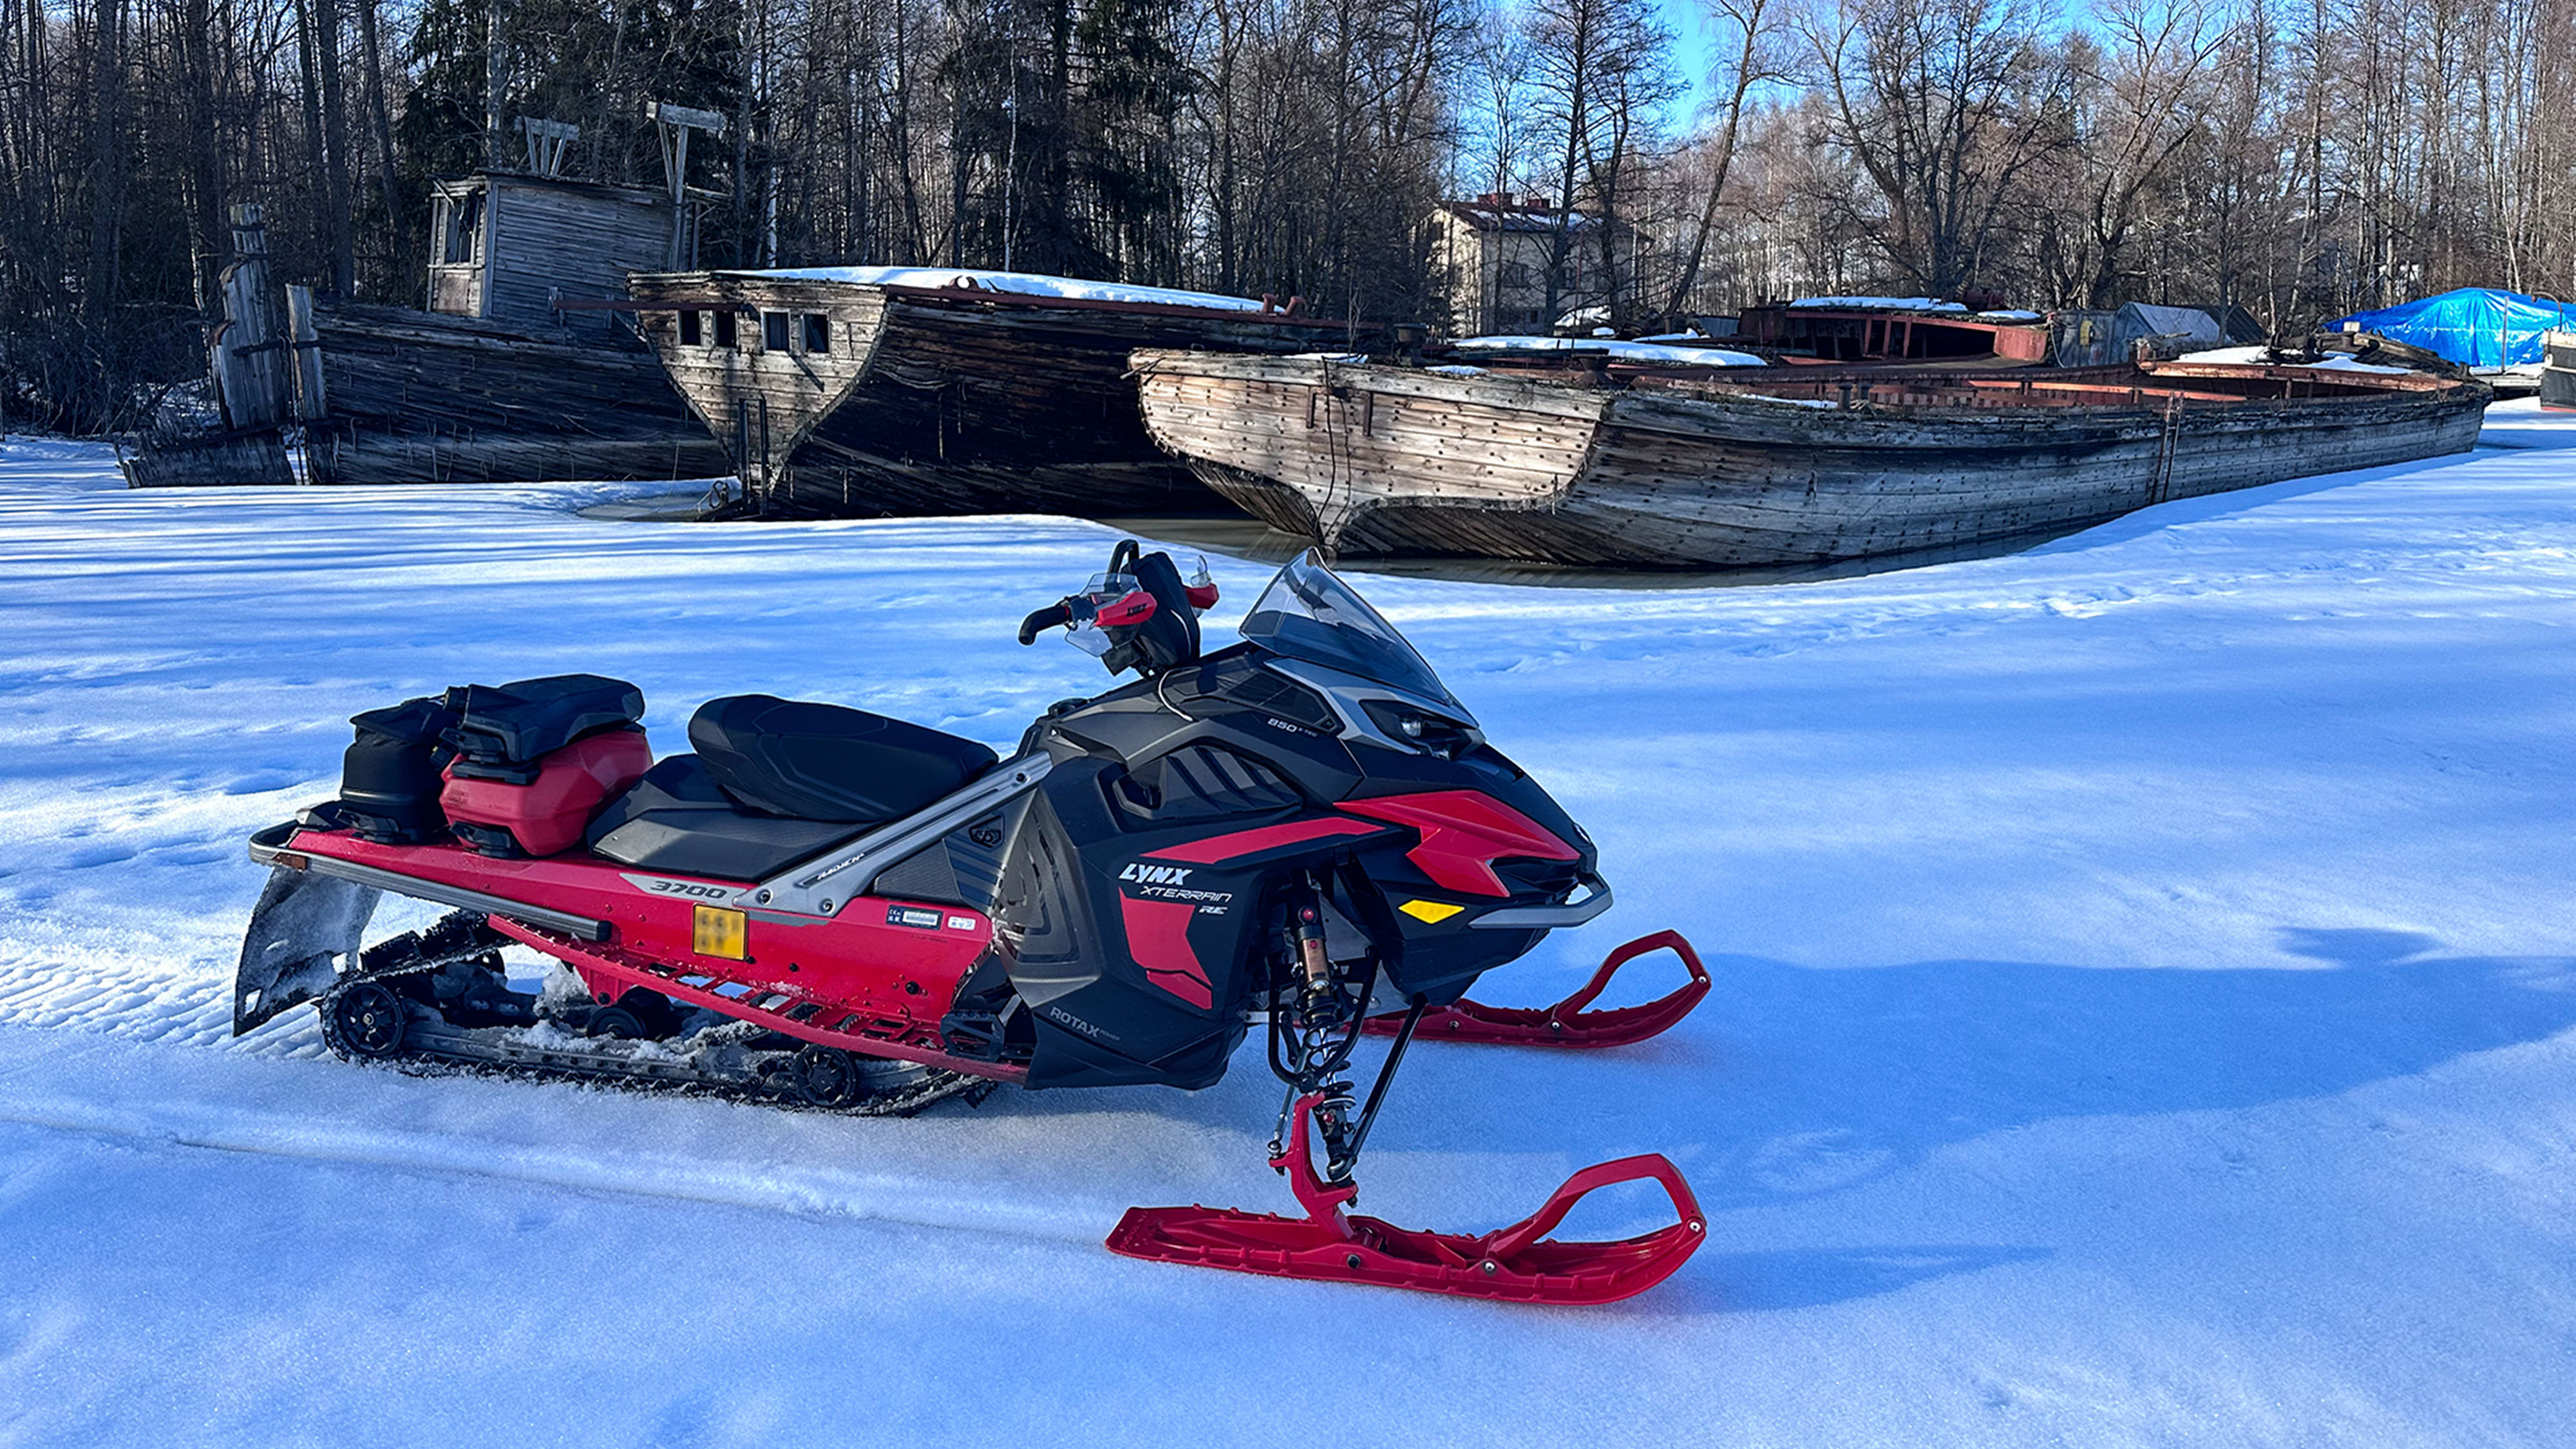 Lynx Xterrain RE 850 E-TEC crossover snowmobile next to old wooden boats